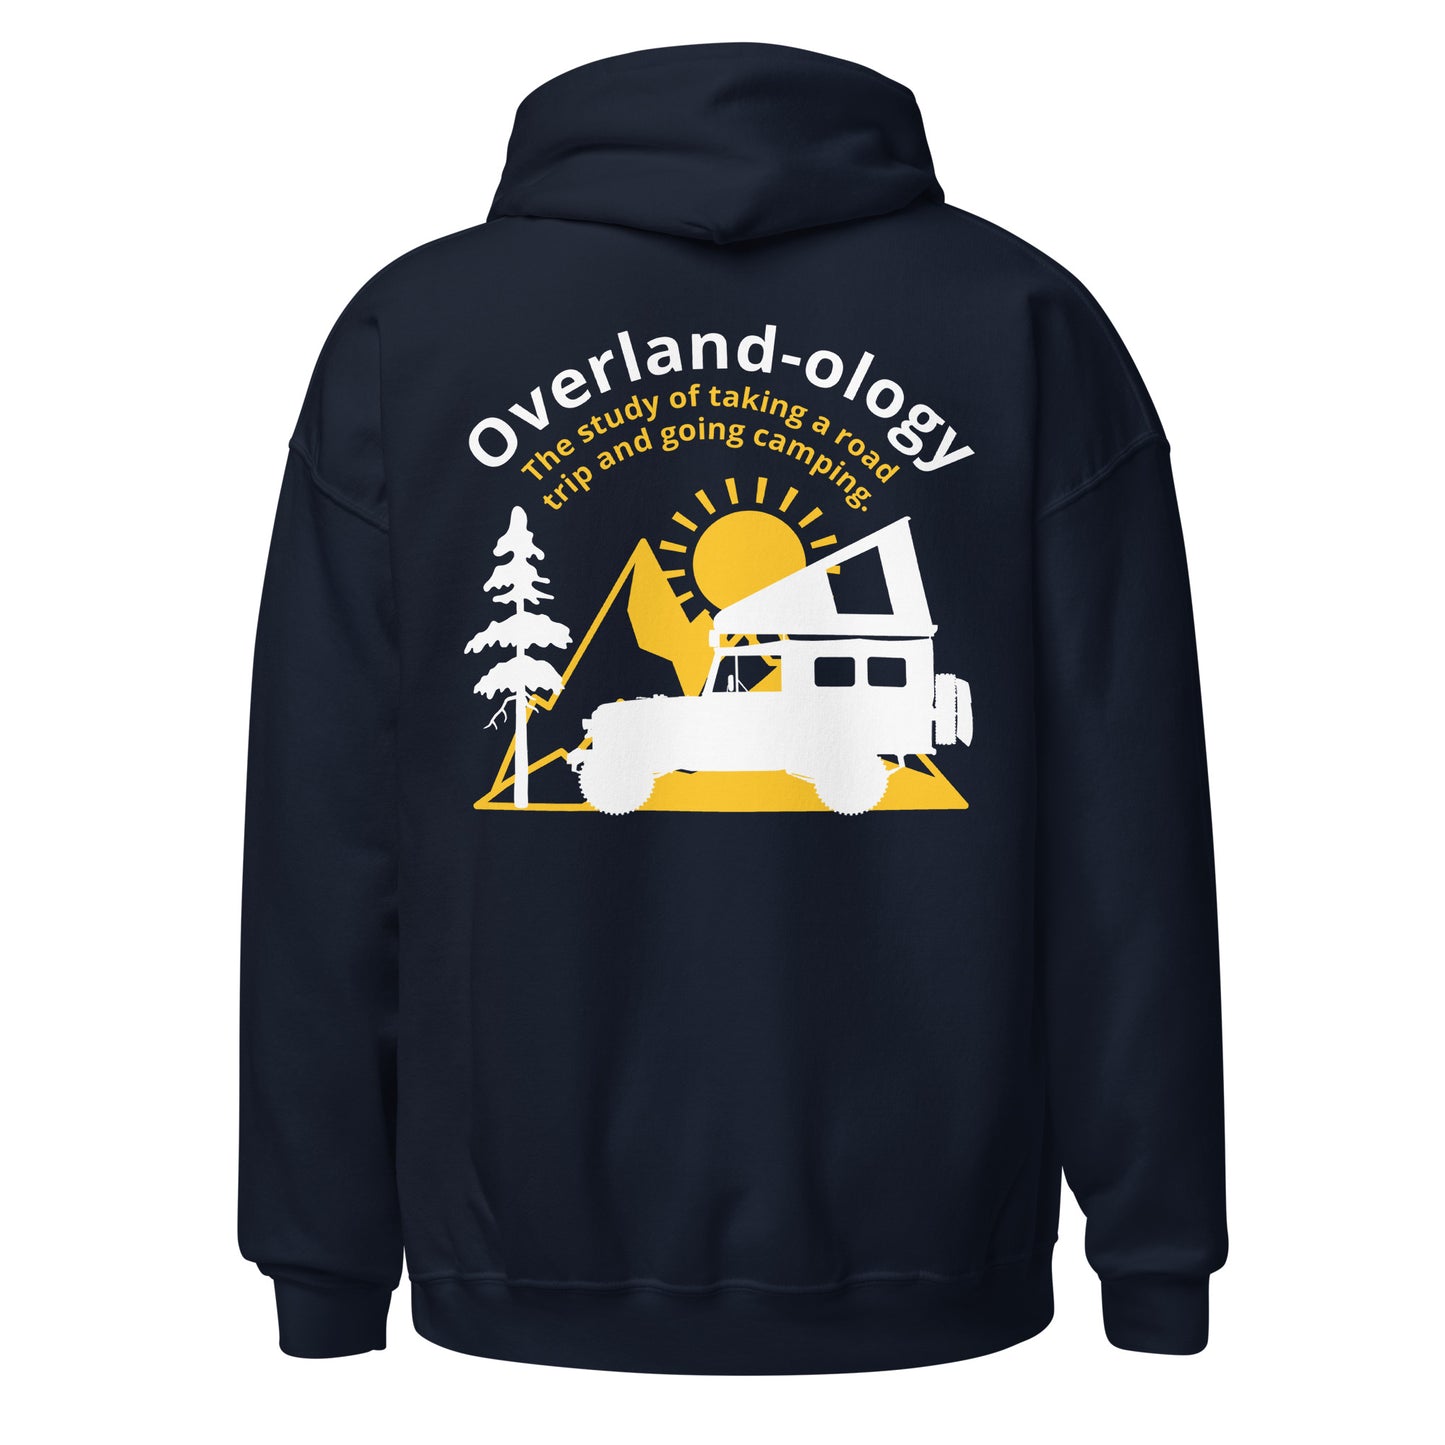 Overland-ology Hoodie. The study of road-trips and camping. Navy. Back View. overland365.com